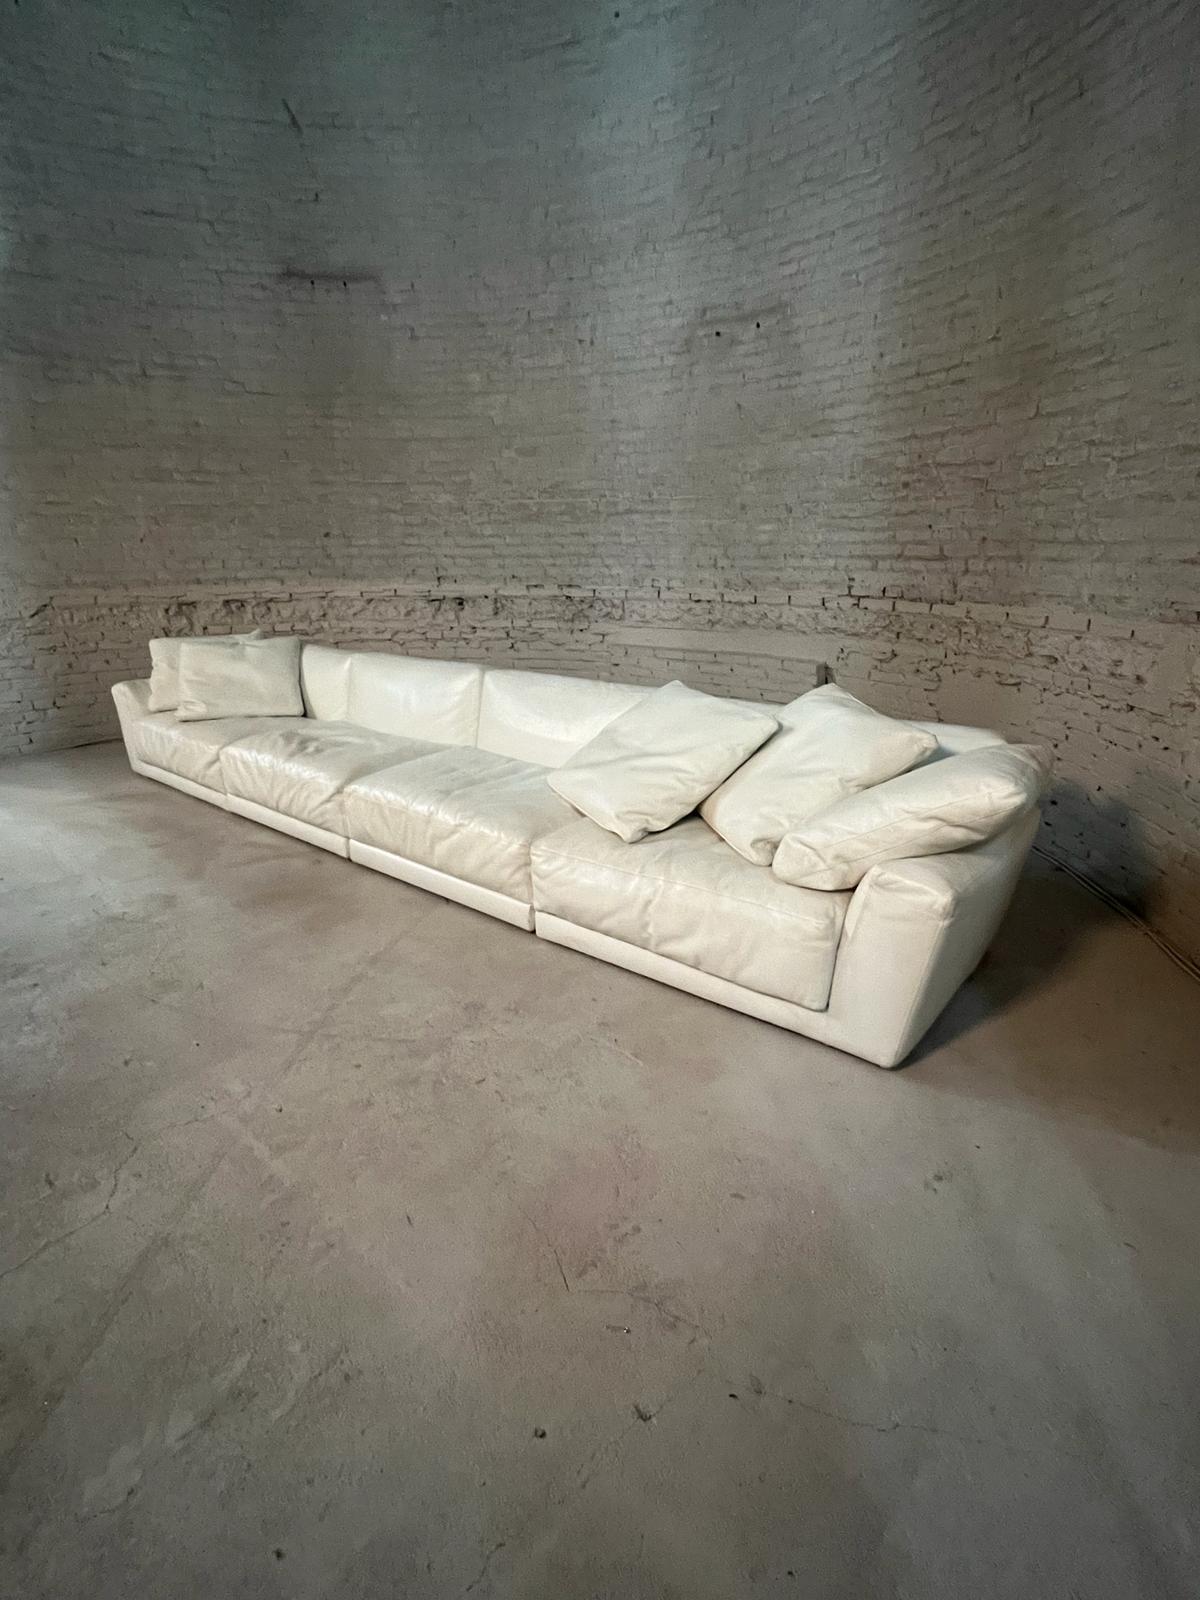 A sofa extravaganza in soft calf leather. Made by B&B Italia, designed by Antonio Citterio. The set named 'LUIS' contains 7 modular units that can be combined in several set-ups.

The pillows have the typical branded B&B Italia perforation that make